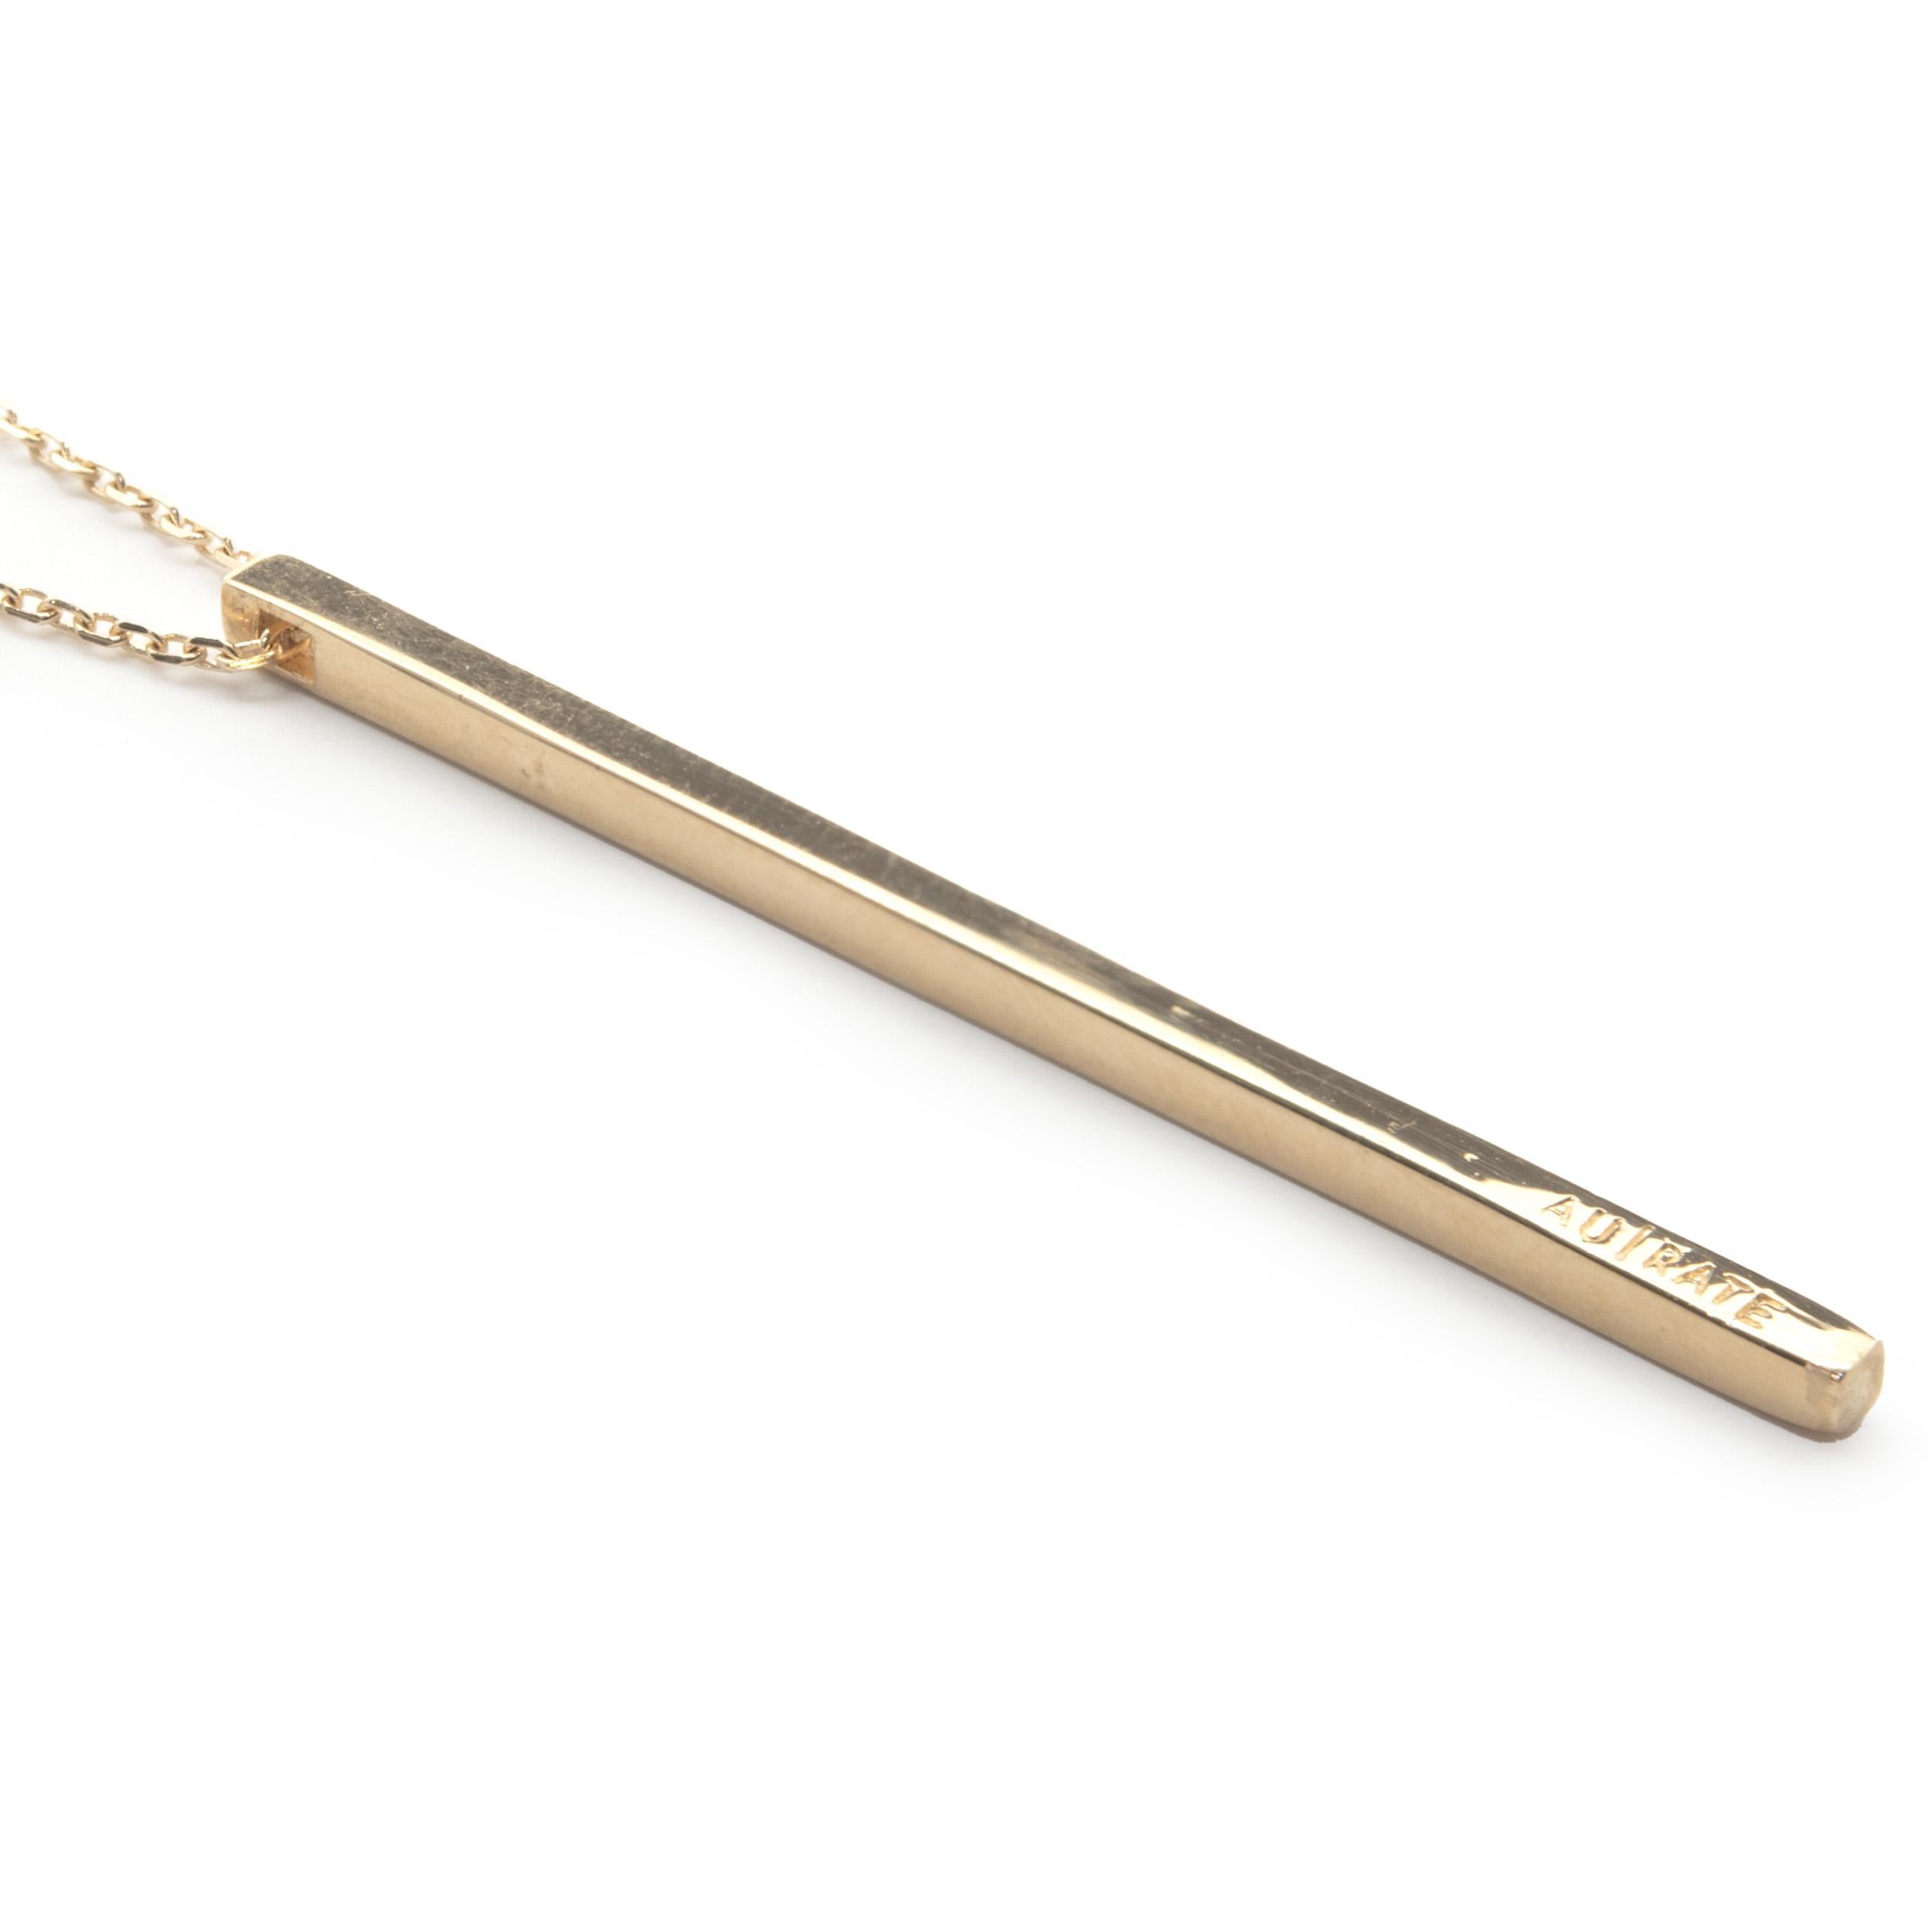 Designer: custom
Material: 14K yellow gold
Dimensions: necklace measures 18-inches in length
Weight: 36.35 grams